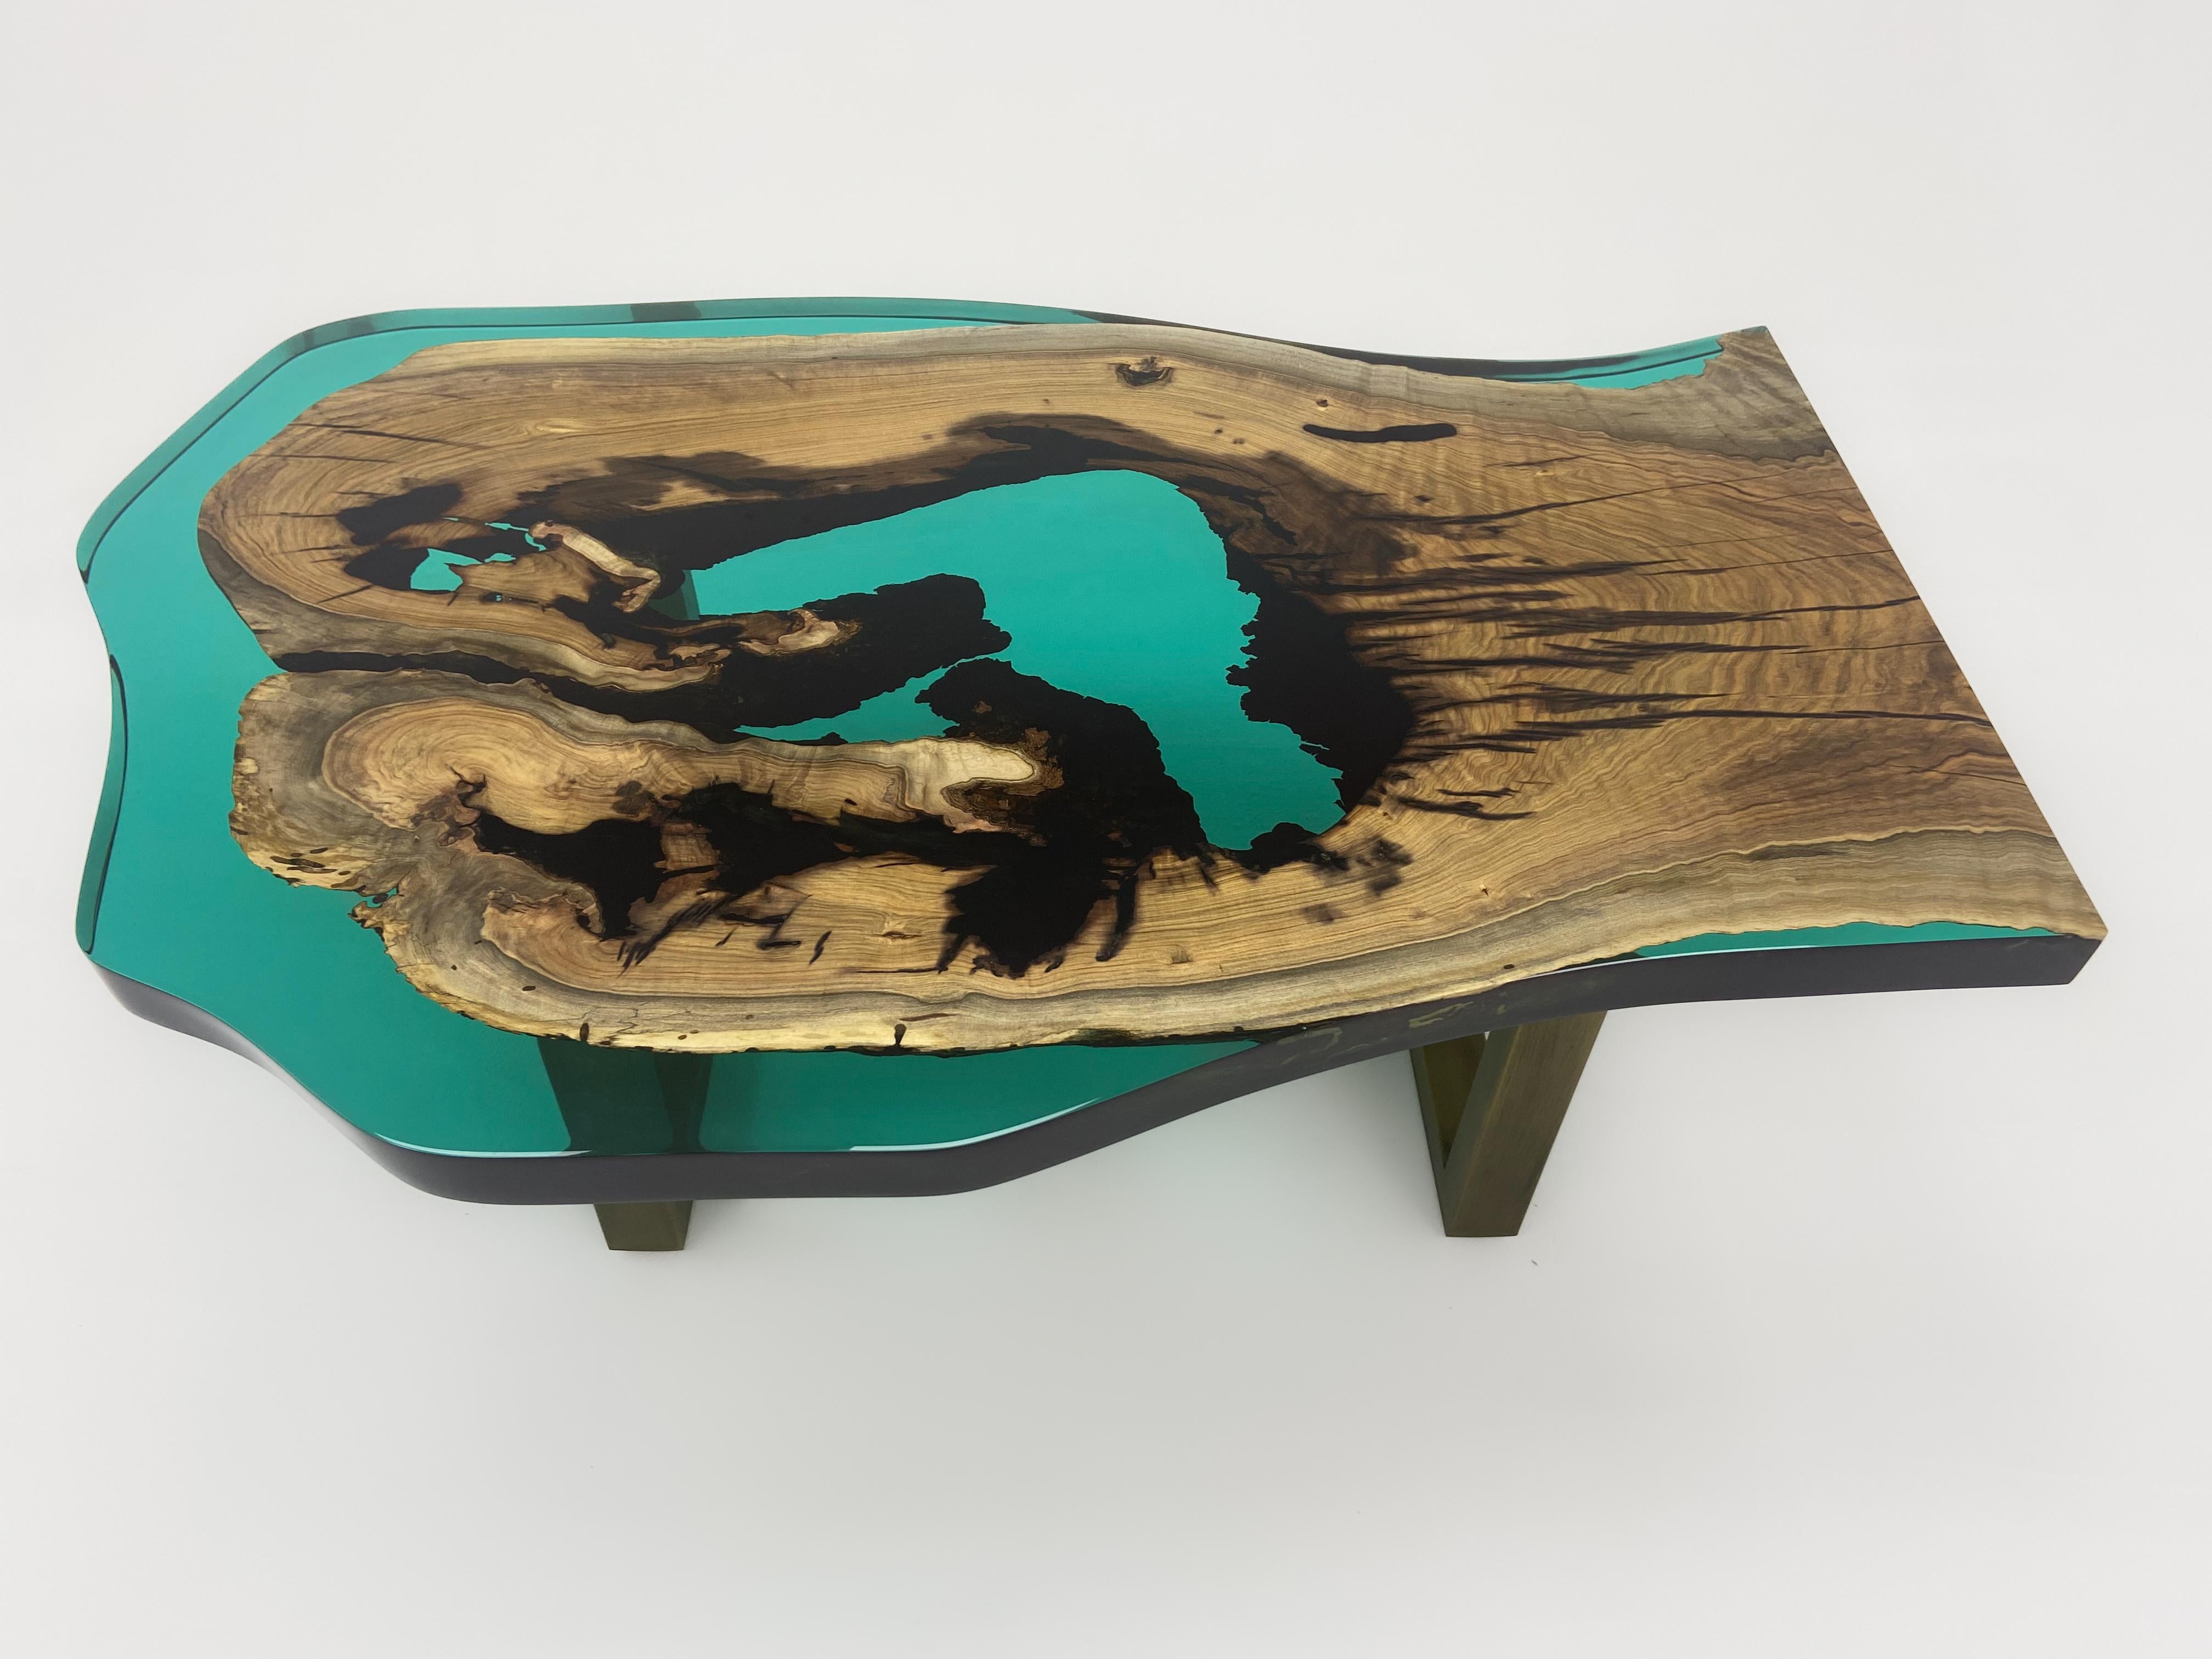 Metalwork Solid Walnut Turquoise Epoxy Resin Coffee Table For Sale